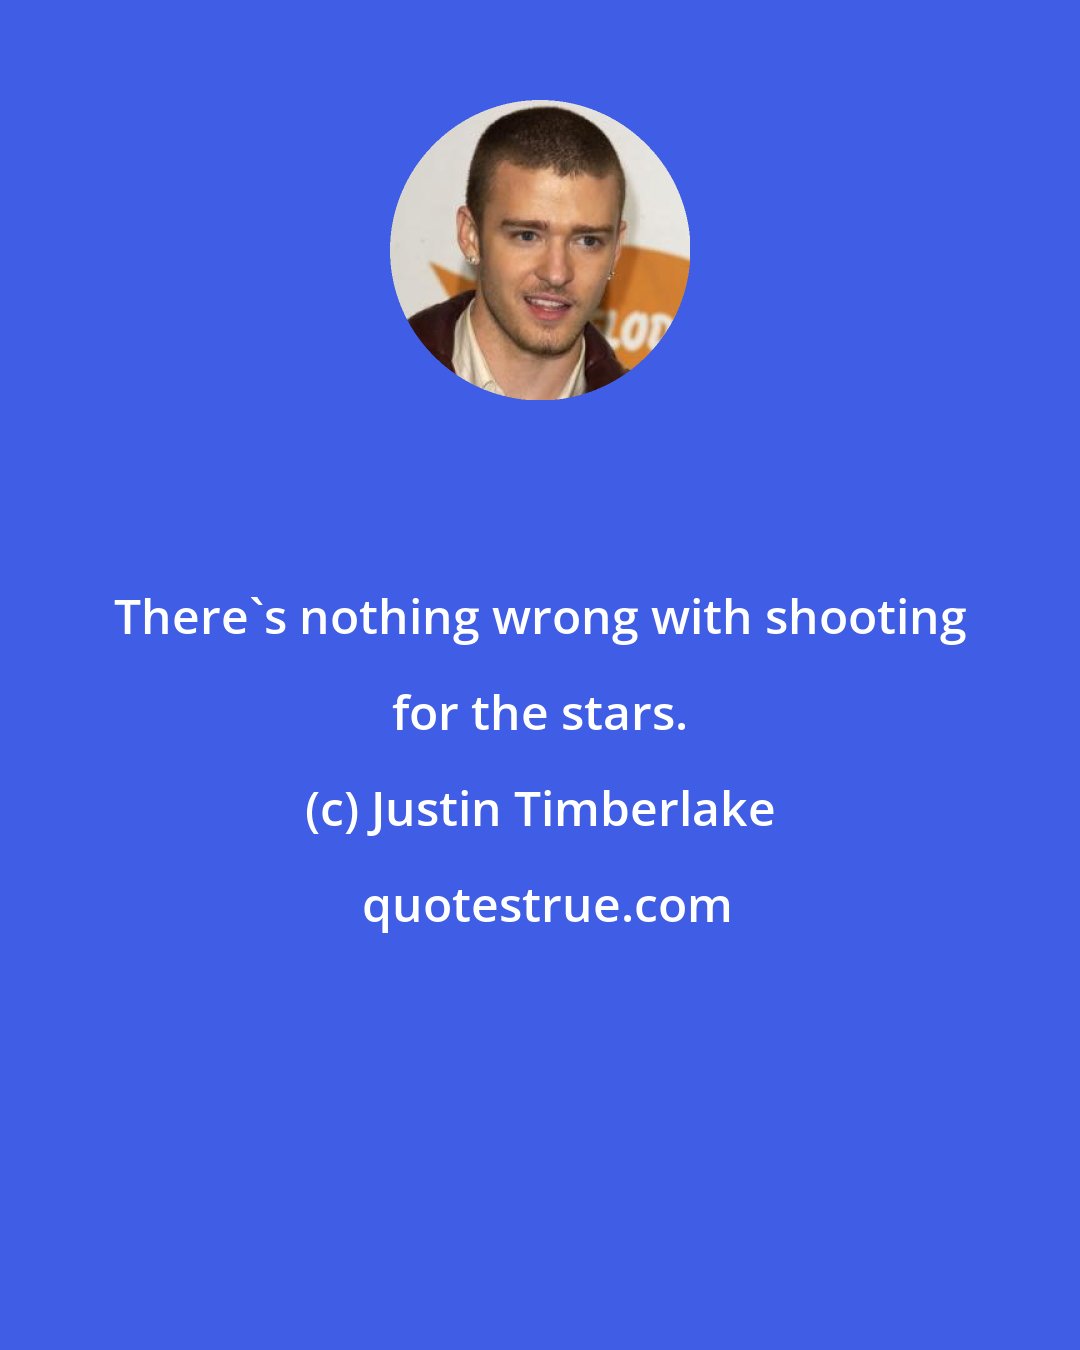 Justin Timberlake: There's nothing wrong with shooting for the stars.